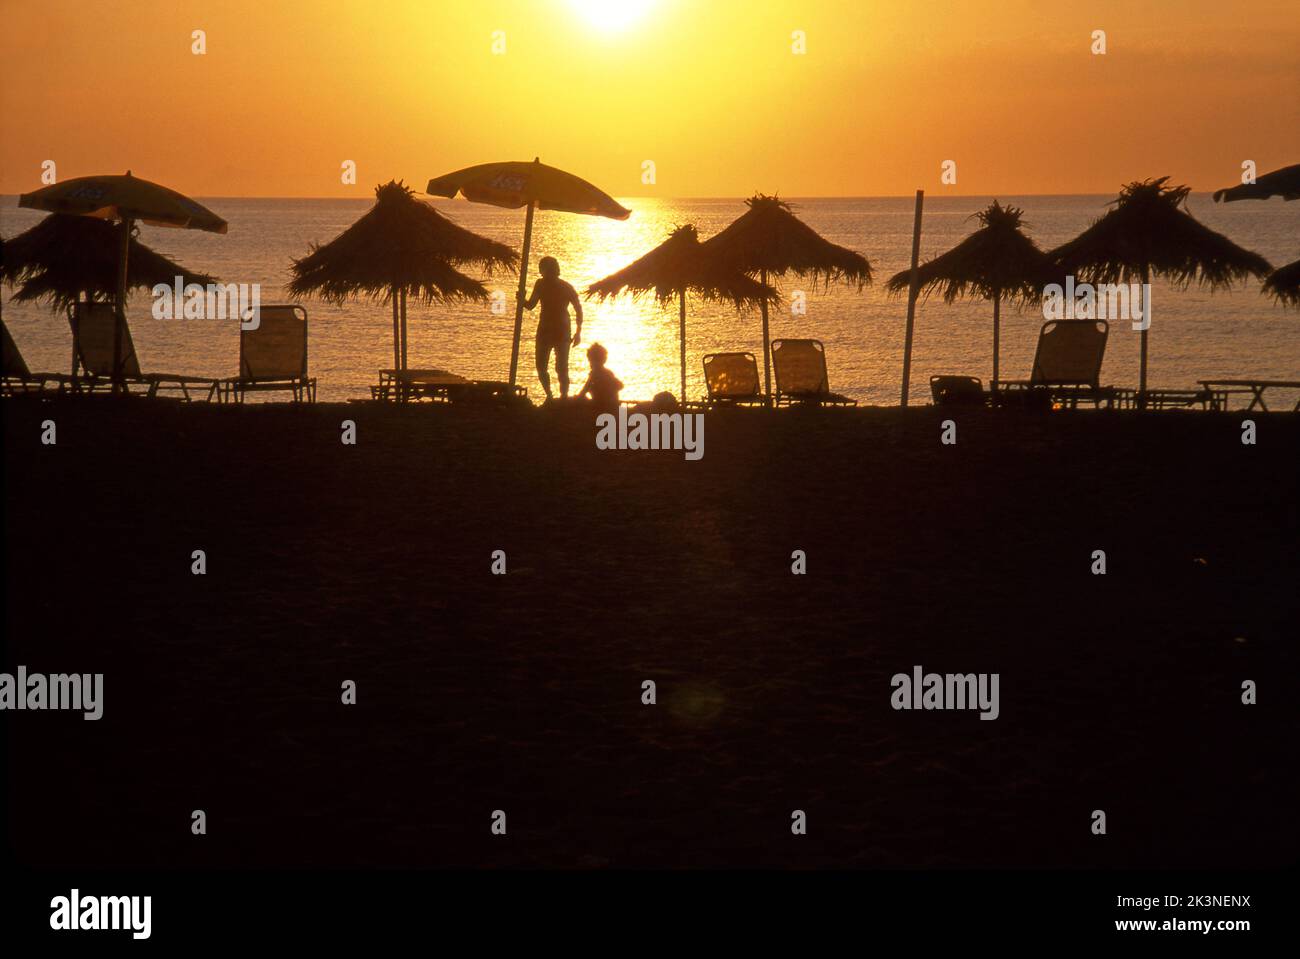 People under an umbrella on a beach on the Greek Island of Crete in the Aegean Sea. Stock Photo